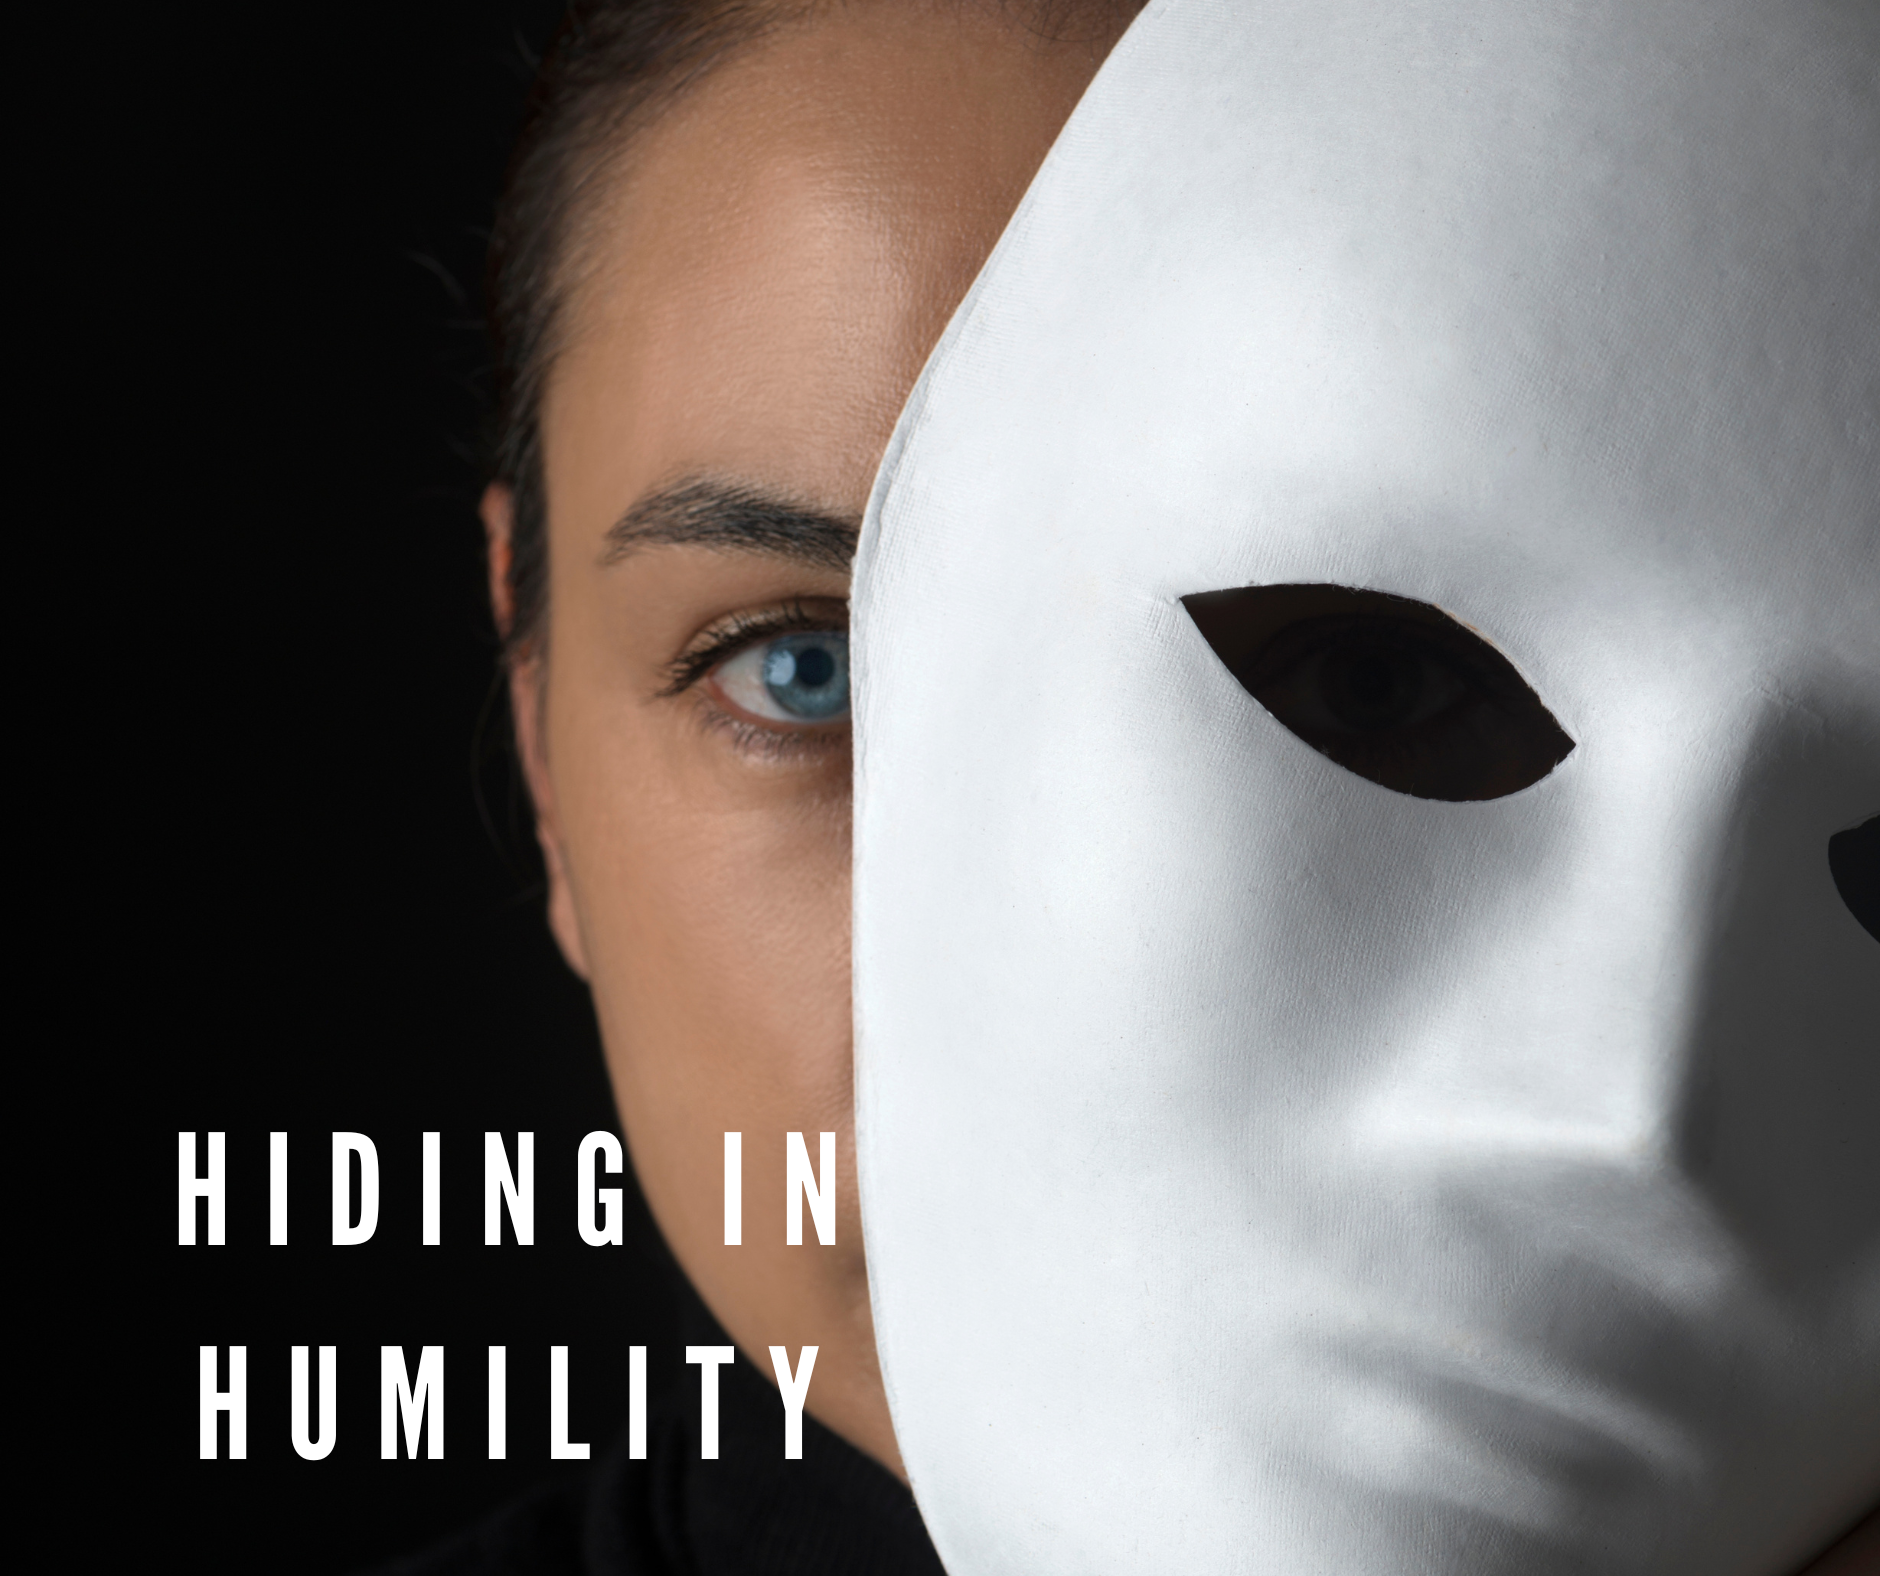 Hiding in Humility